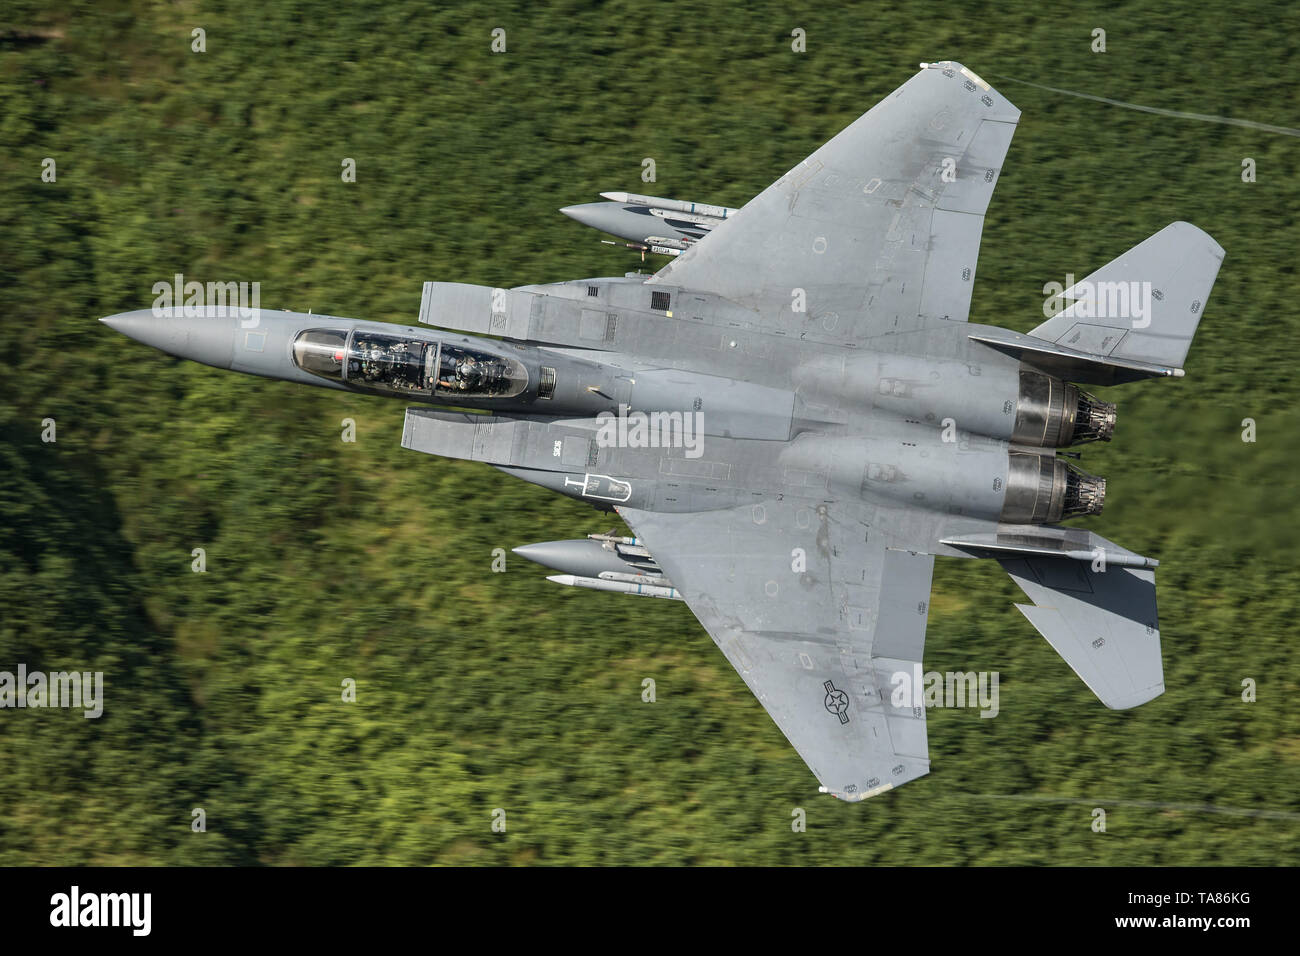 USAF F-15E Strike Eagle flying low level through the Mach Loop in Wales, UK Stock Photo